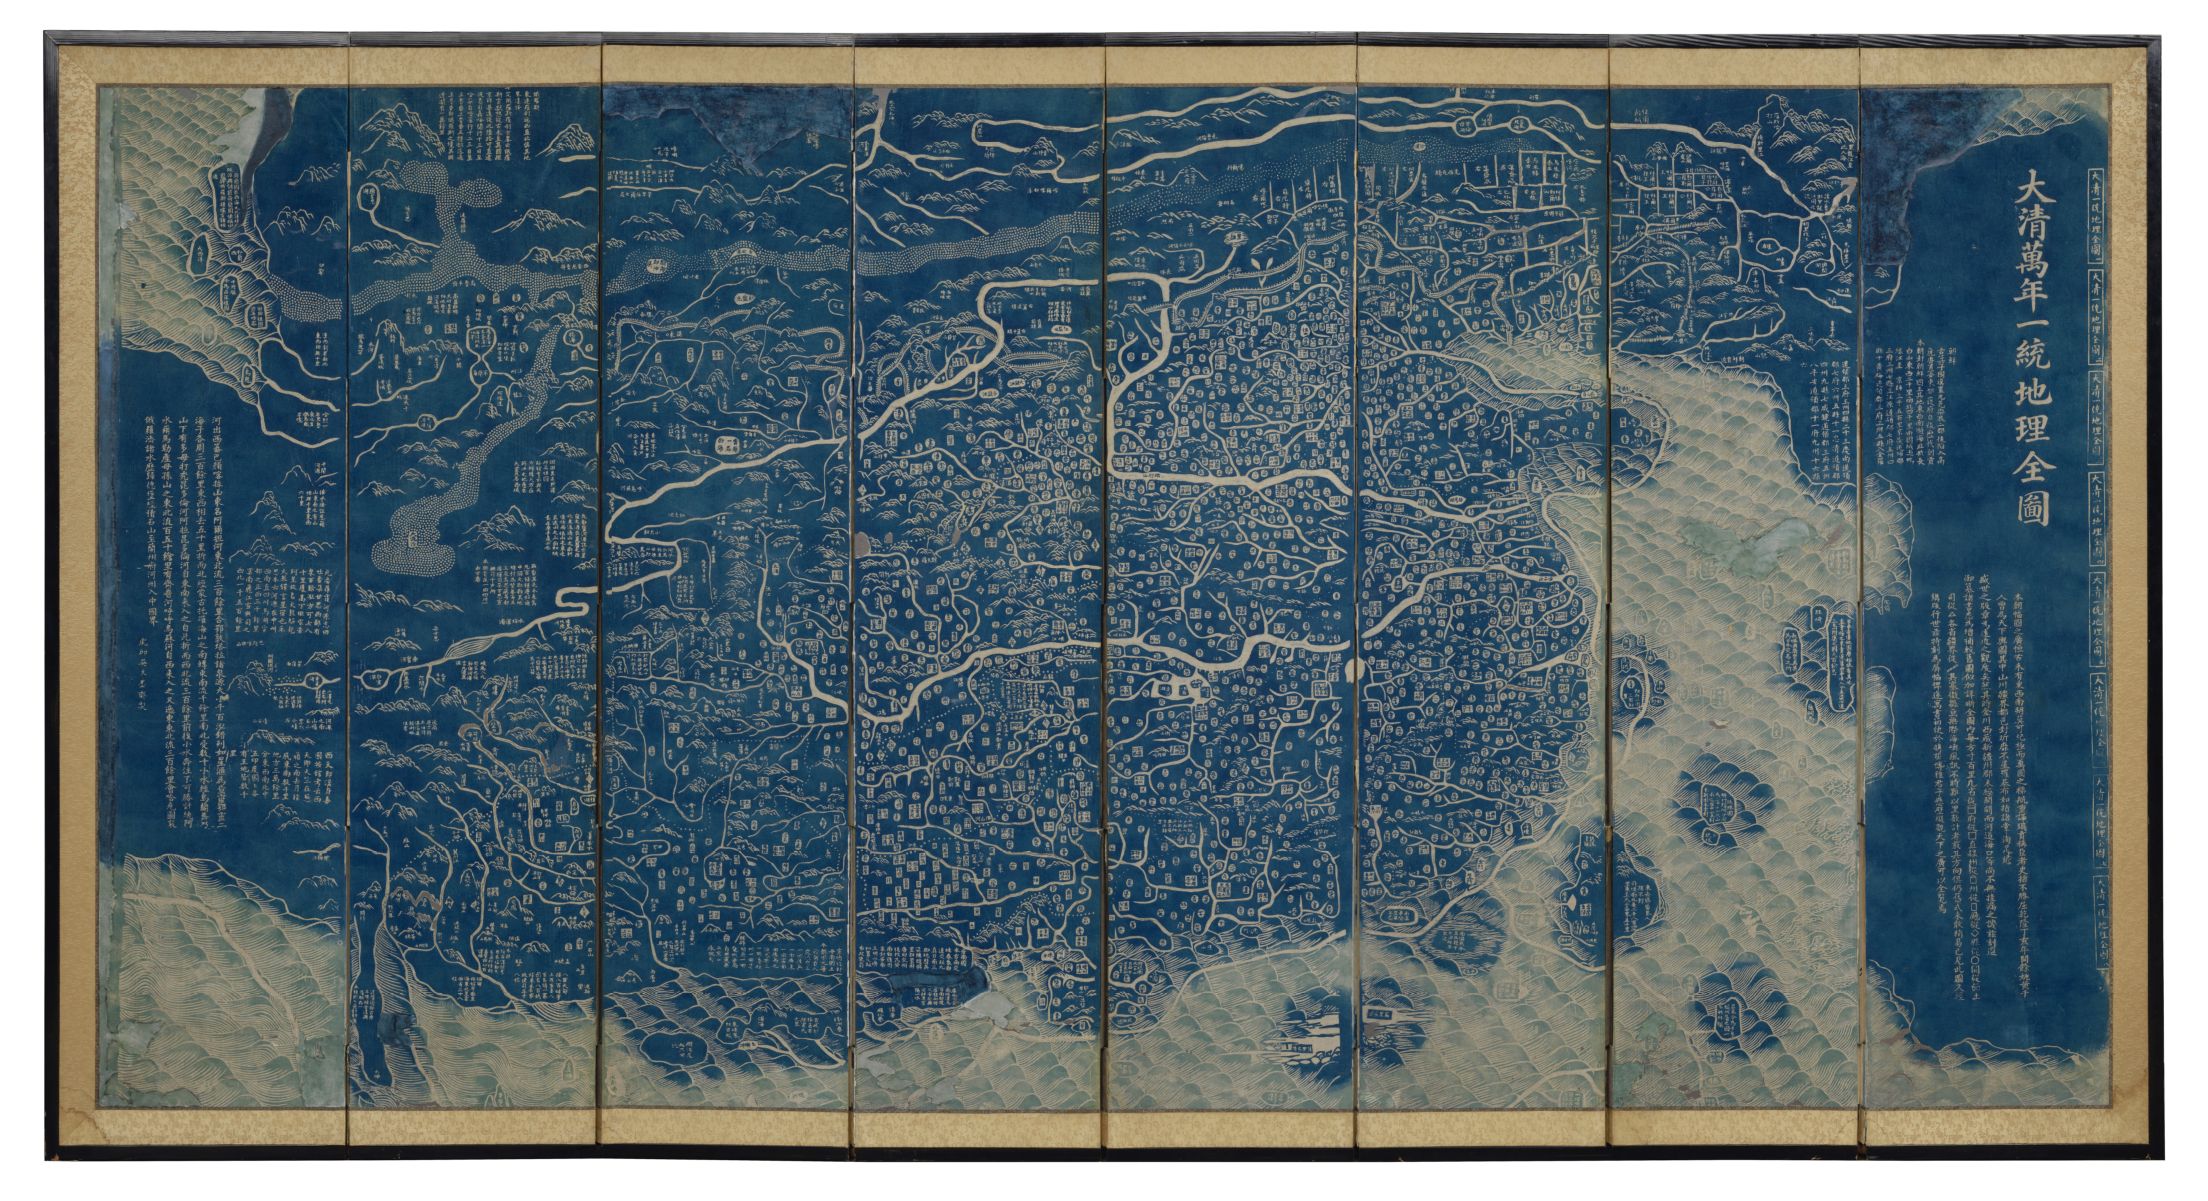 The terrestrial map from the MacLean Collection